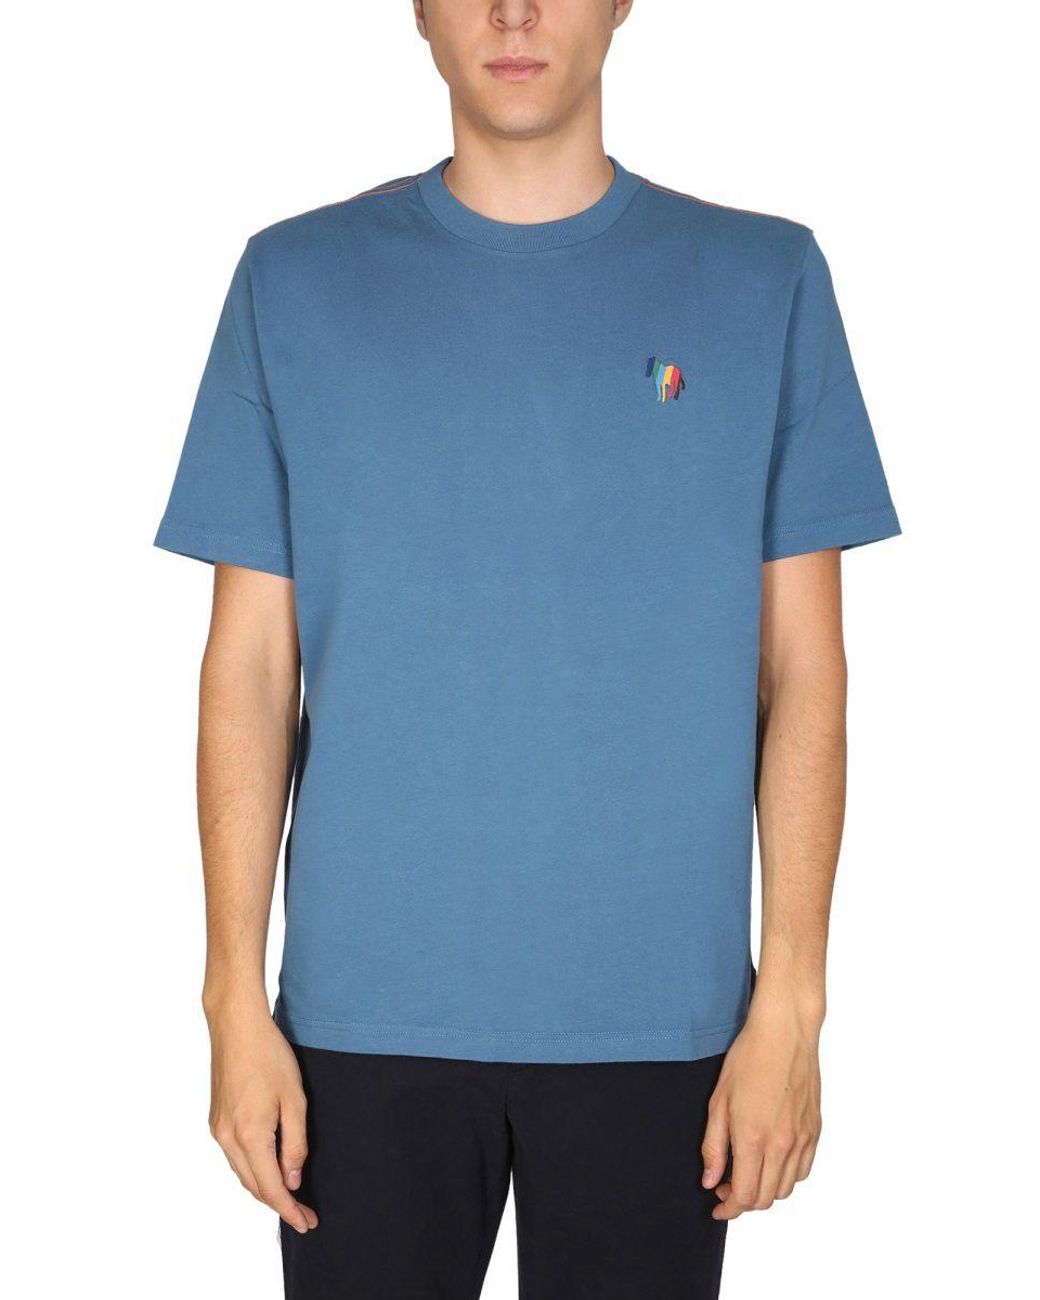 Paul Smith Baumwolle Andere materialien t-shirt in Blau für Herren Herren T-Shirts Paul Smith T-Shirts 